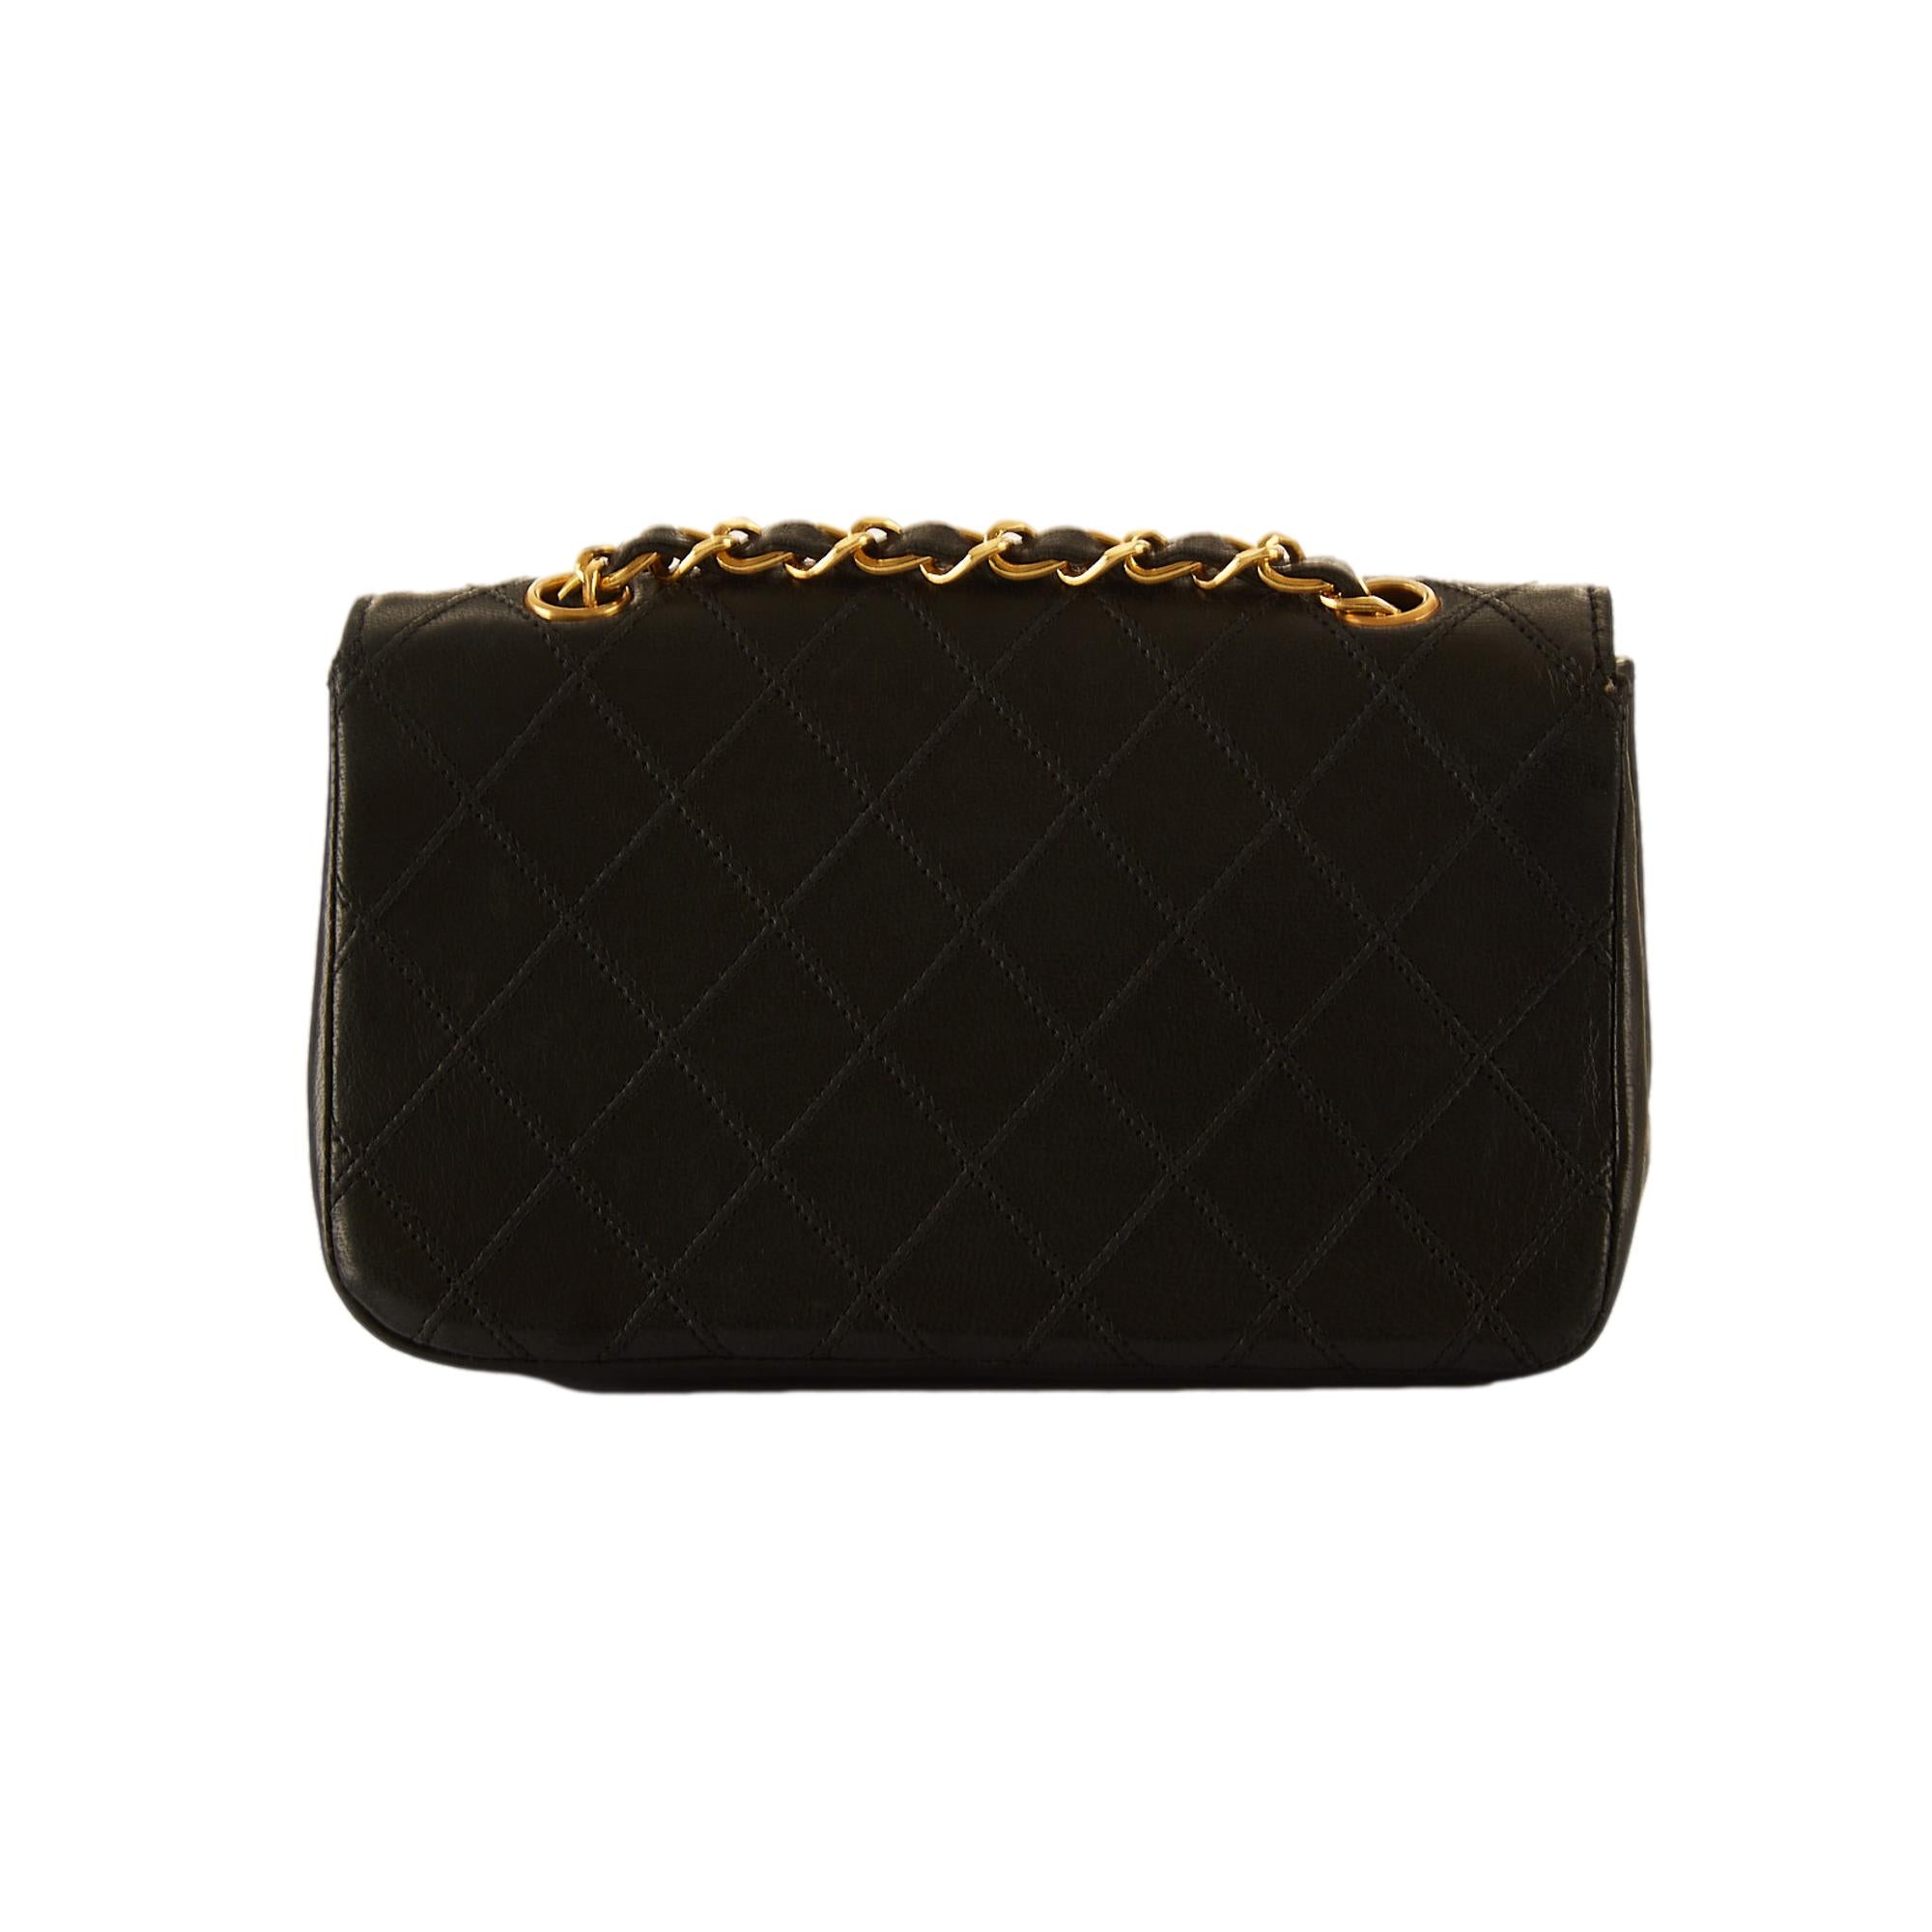 Chanel Black Quilted Mini Chain Flap Bag